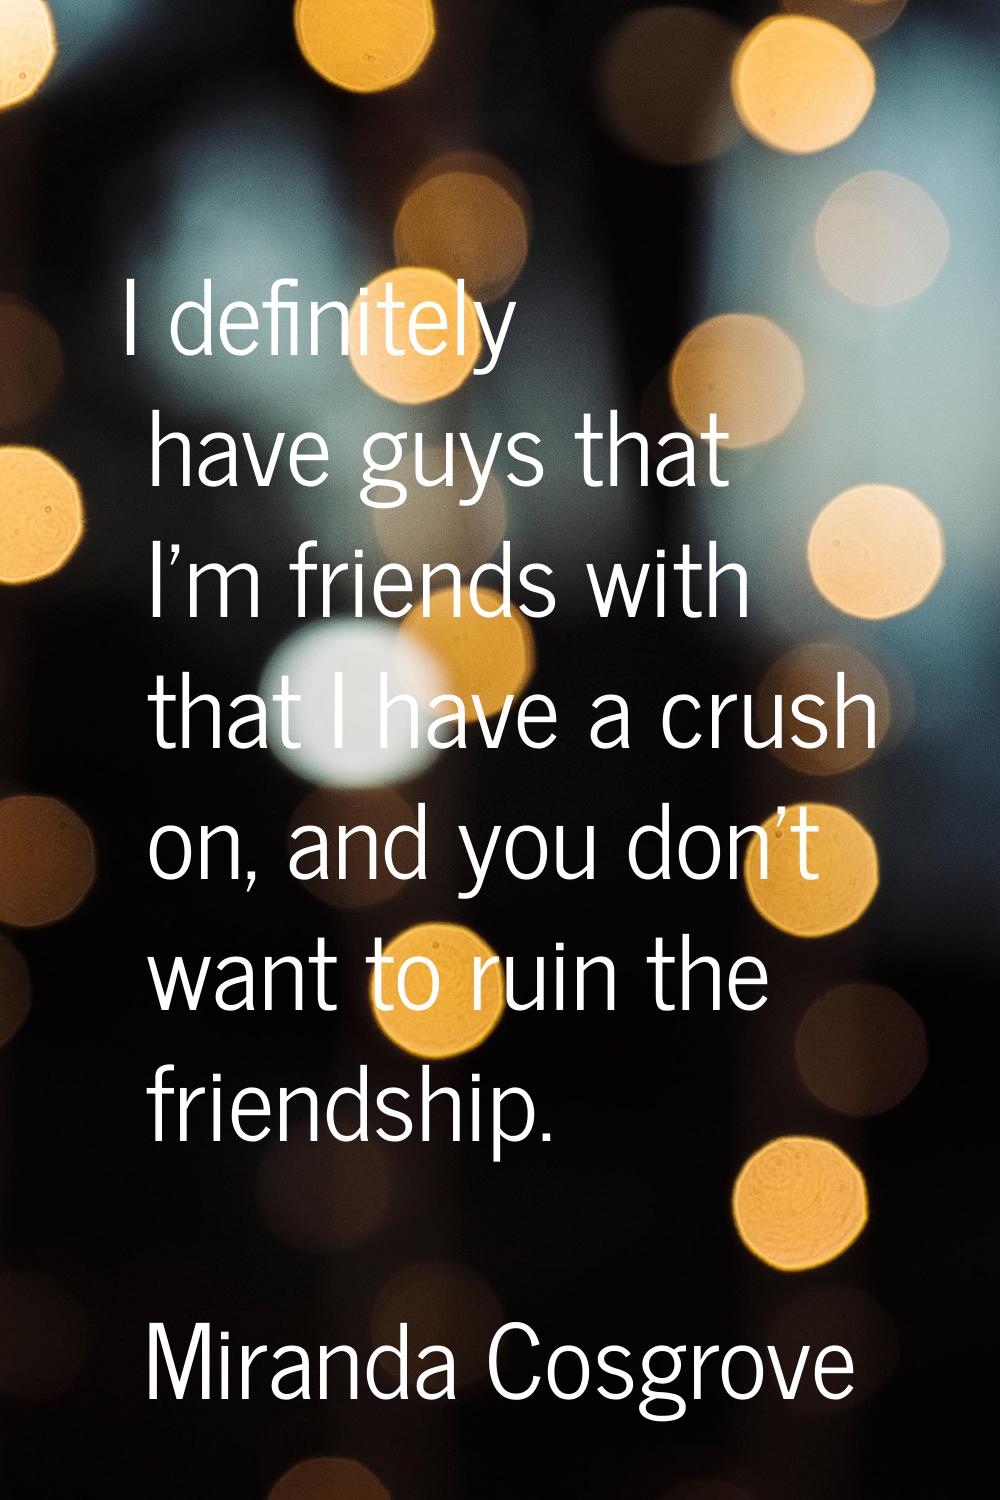 I definitely have guys that I'm friends with that I have a crush on, and you don't want to ruin the